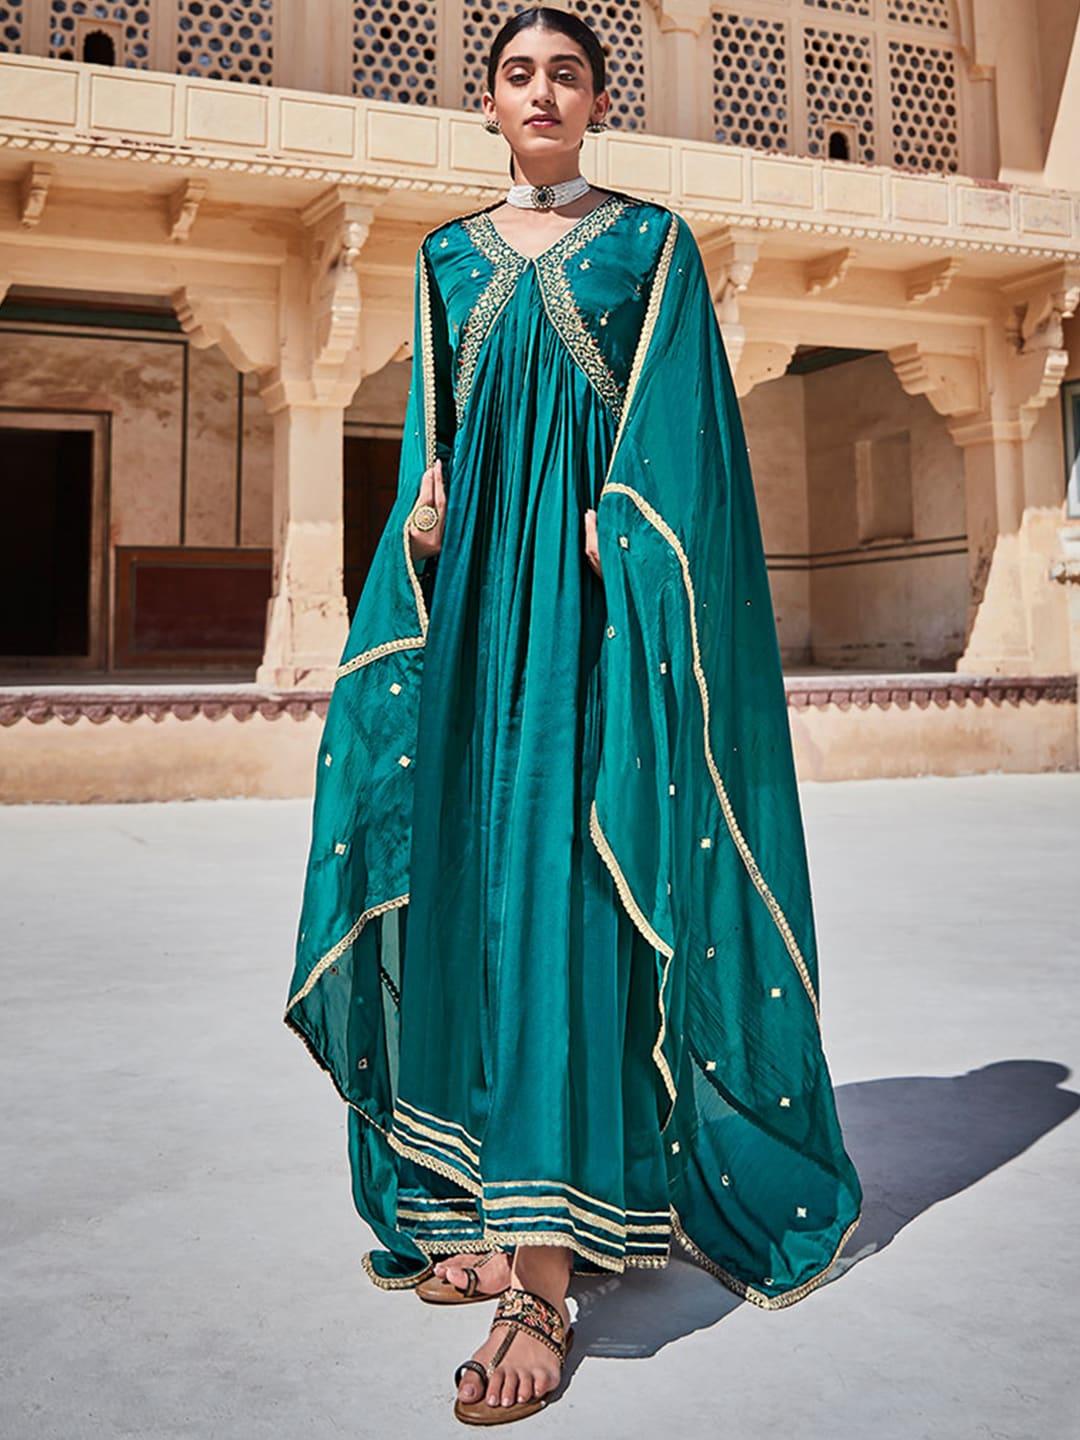 jaipur-kurti-green-&-gold-toned-ethnic-motifs-embroidered-a-line-maxi-ethnic-dress